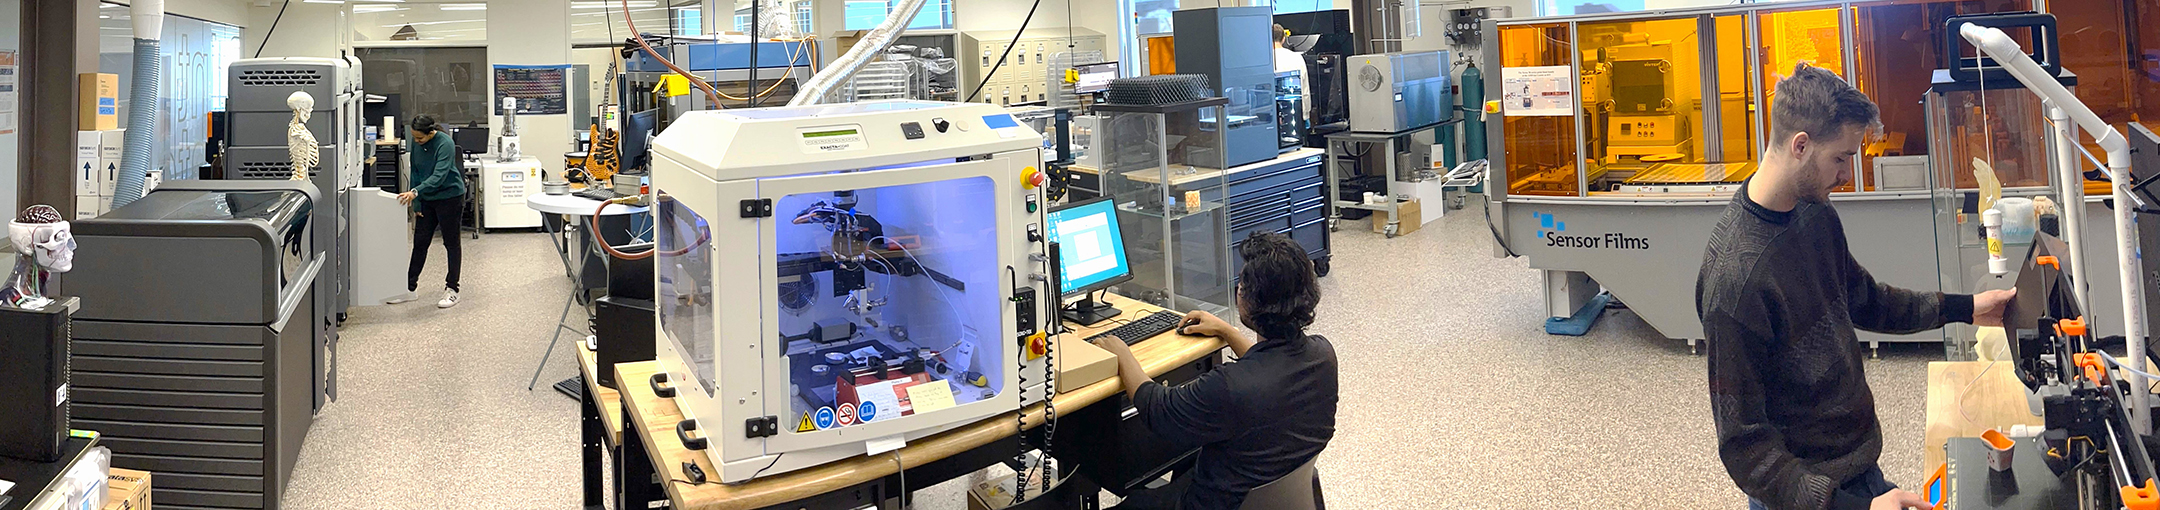 a panorama view of the AMPrint lab with three people working at different equipment